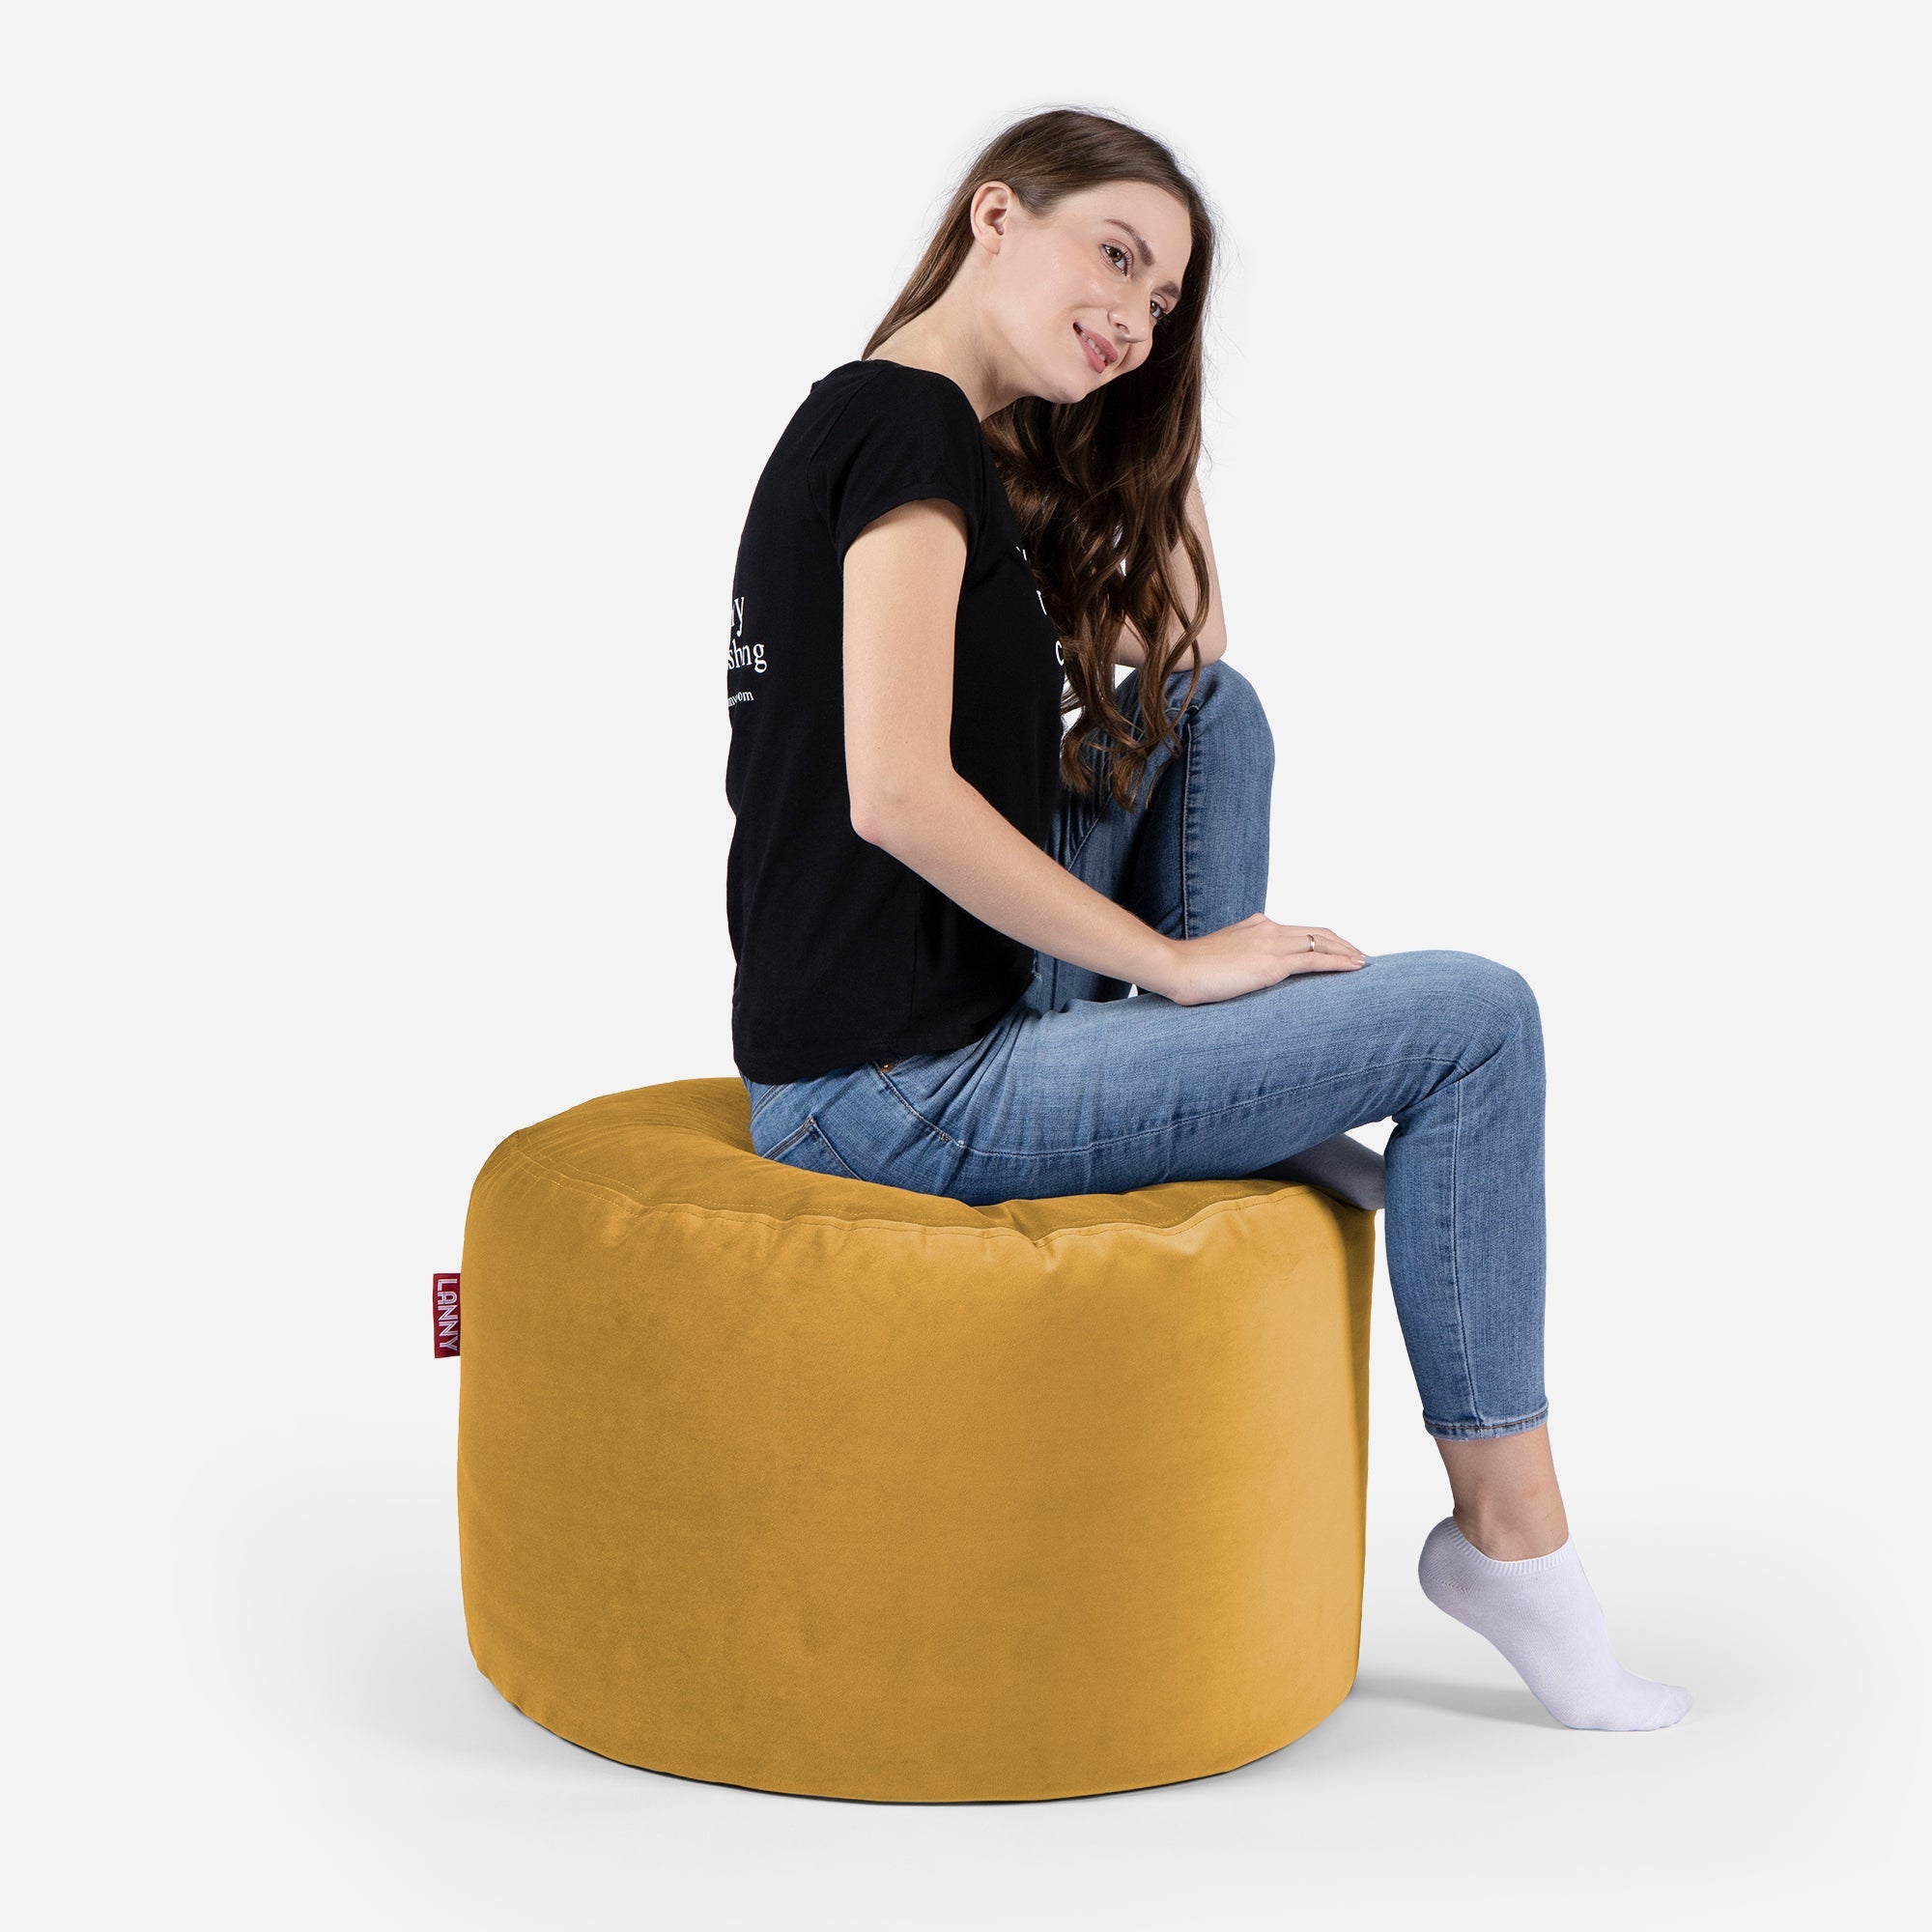 Pouf, Ottoman Mustard color with girl seating on it